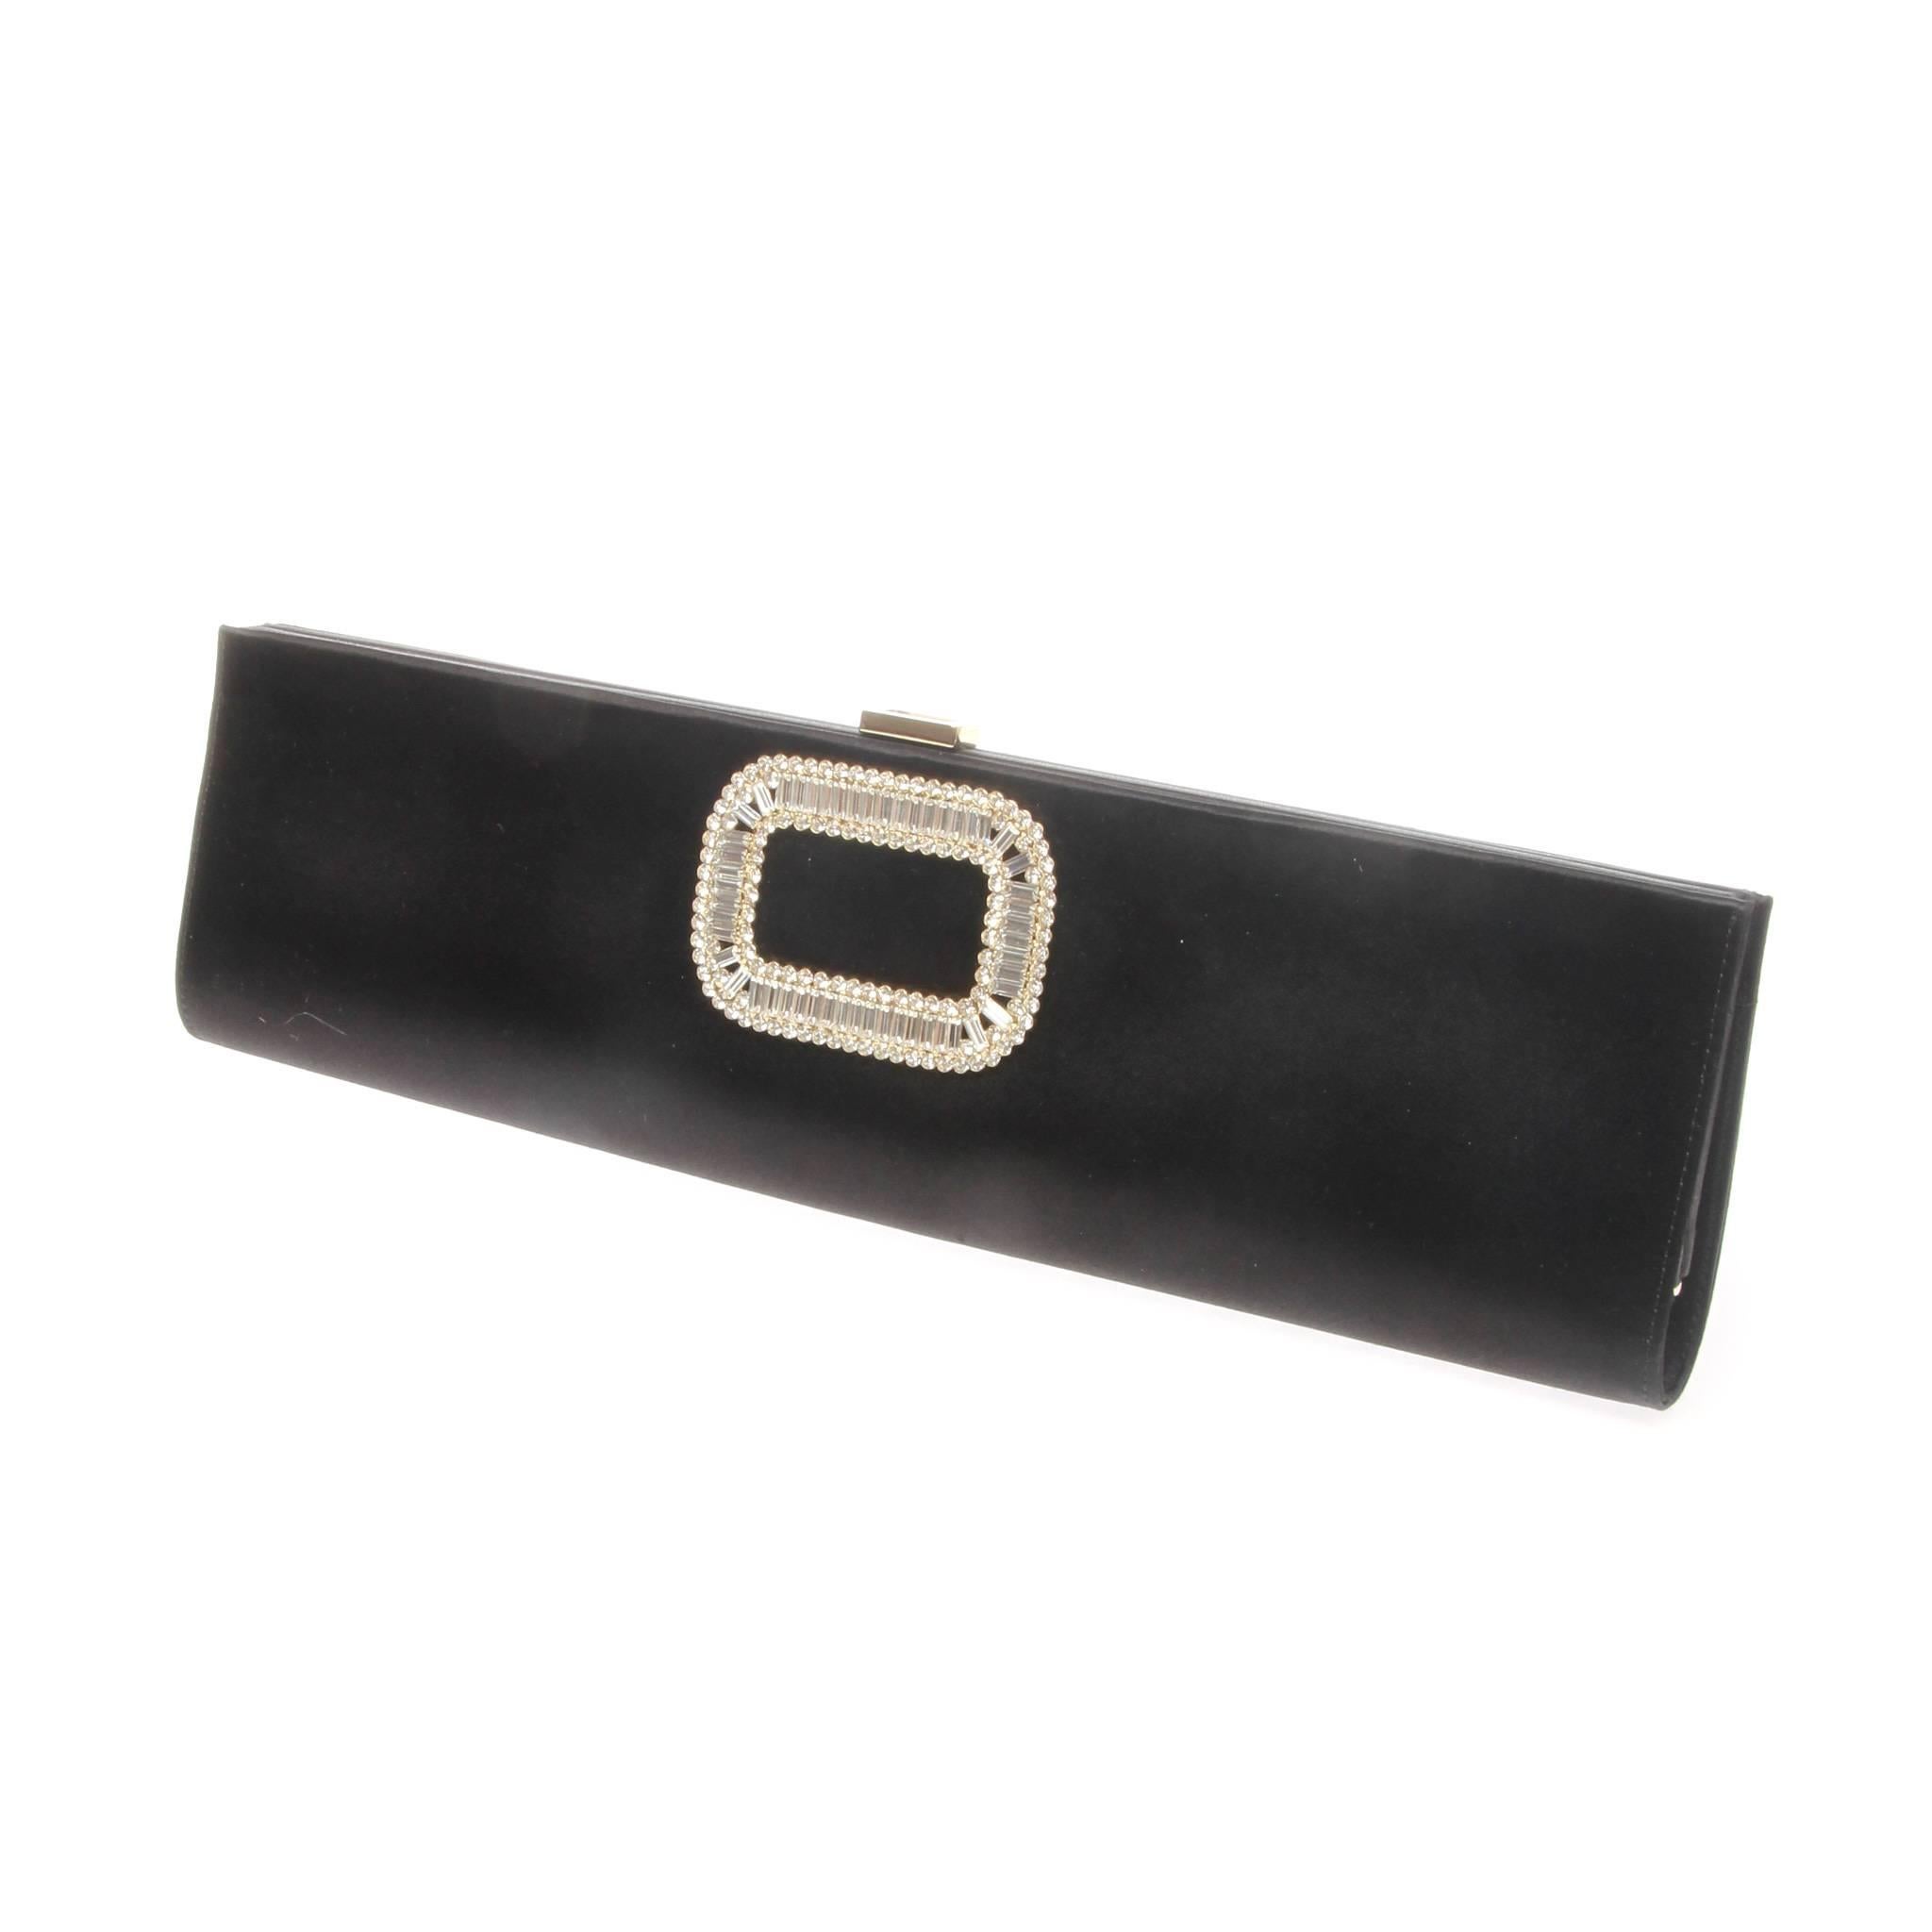 Black satin Roger Vivier clutch with silver-tone hardware, crystal embellishments at front, tonal satin interior lining and push-lock closure at top. 